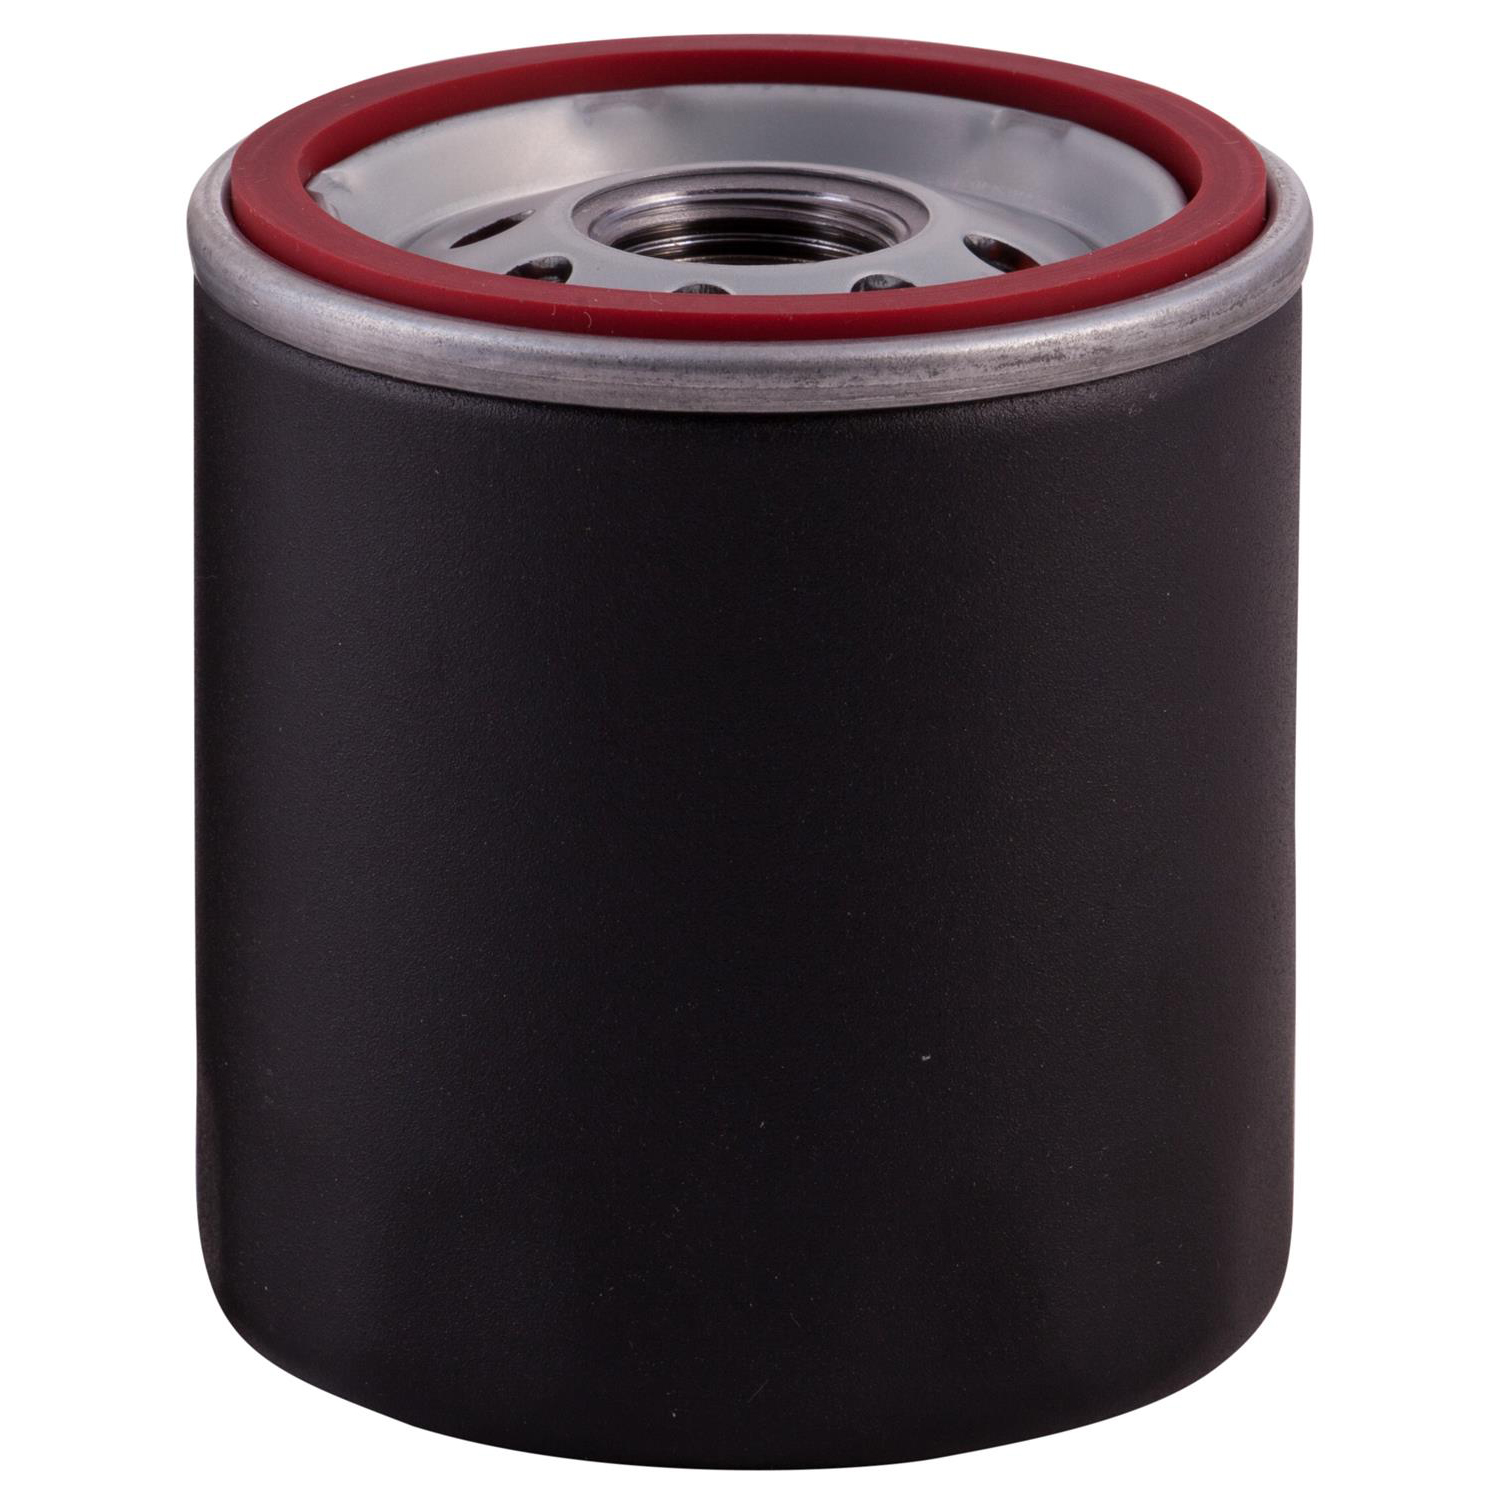 PG4006EX Extended Life Oil Filter up to 10,000 Miles | Fits 2012-1975 Chevrolet, GMC, Hummer, Cadillac, Pontiac, Oldsmobile, Buick, Isuzu, Workhorse Custom Chassis, Avanti (Pack of 6) - image 3 of 6